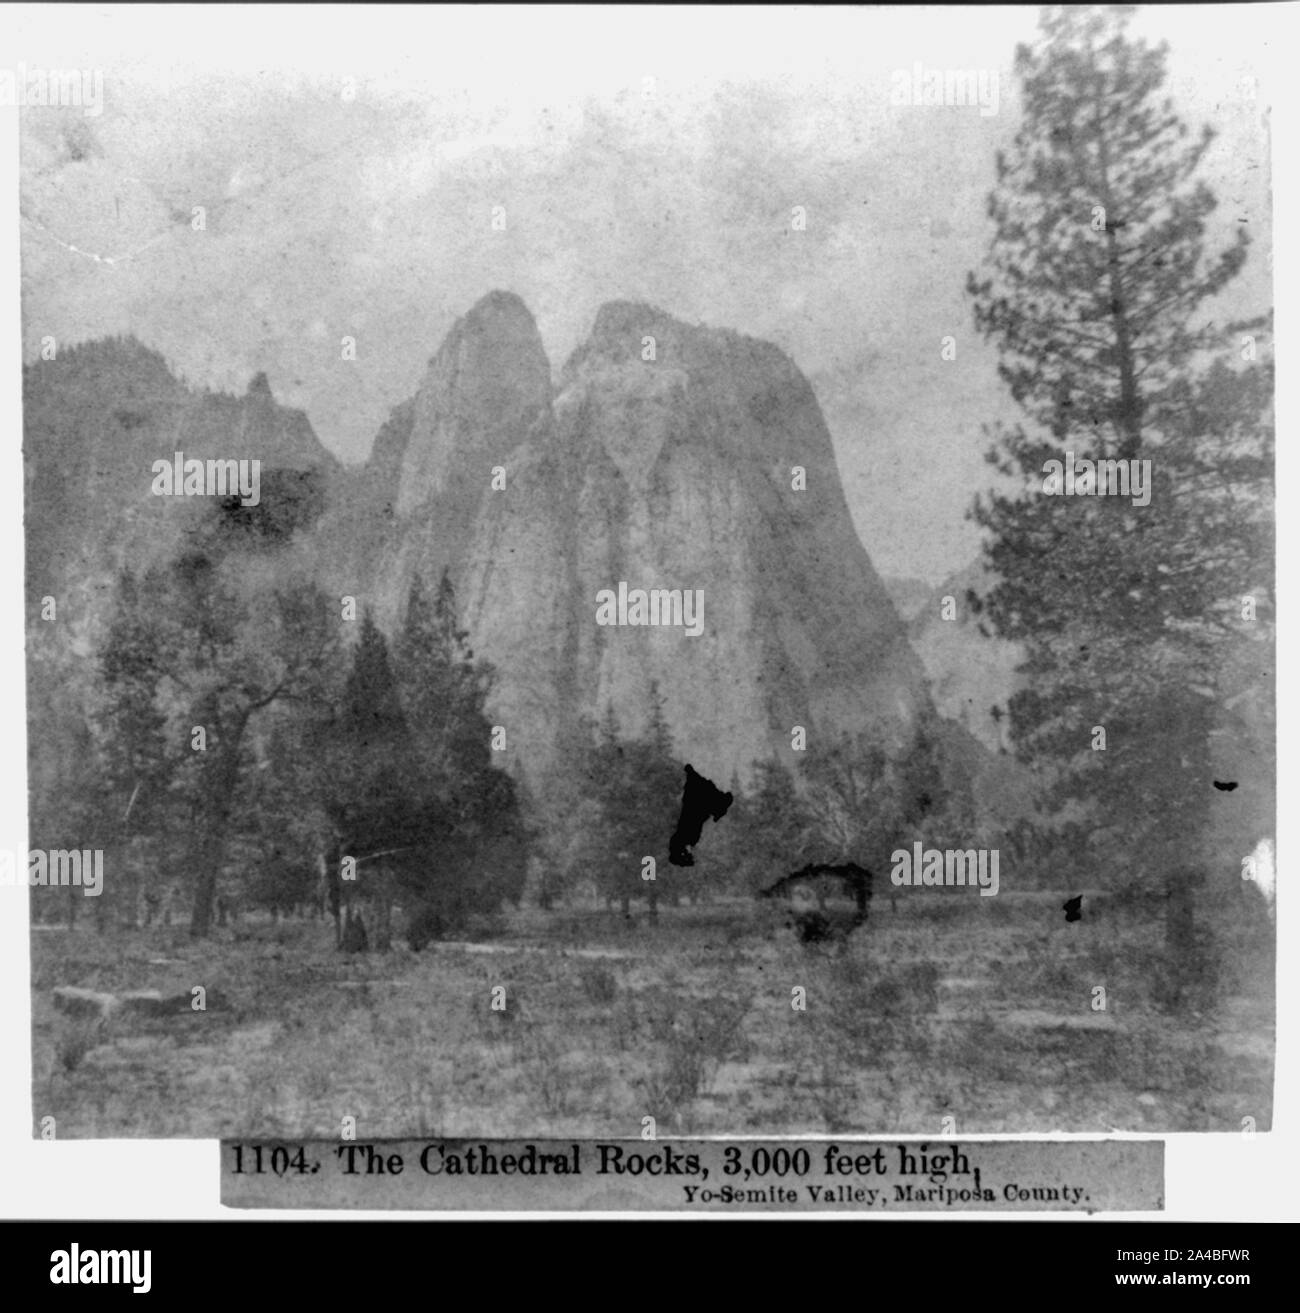 The Cathedral Rocks, 3,000 feet high, Yosemite Valley, Mariposa County Stock Photo